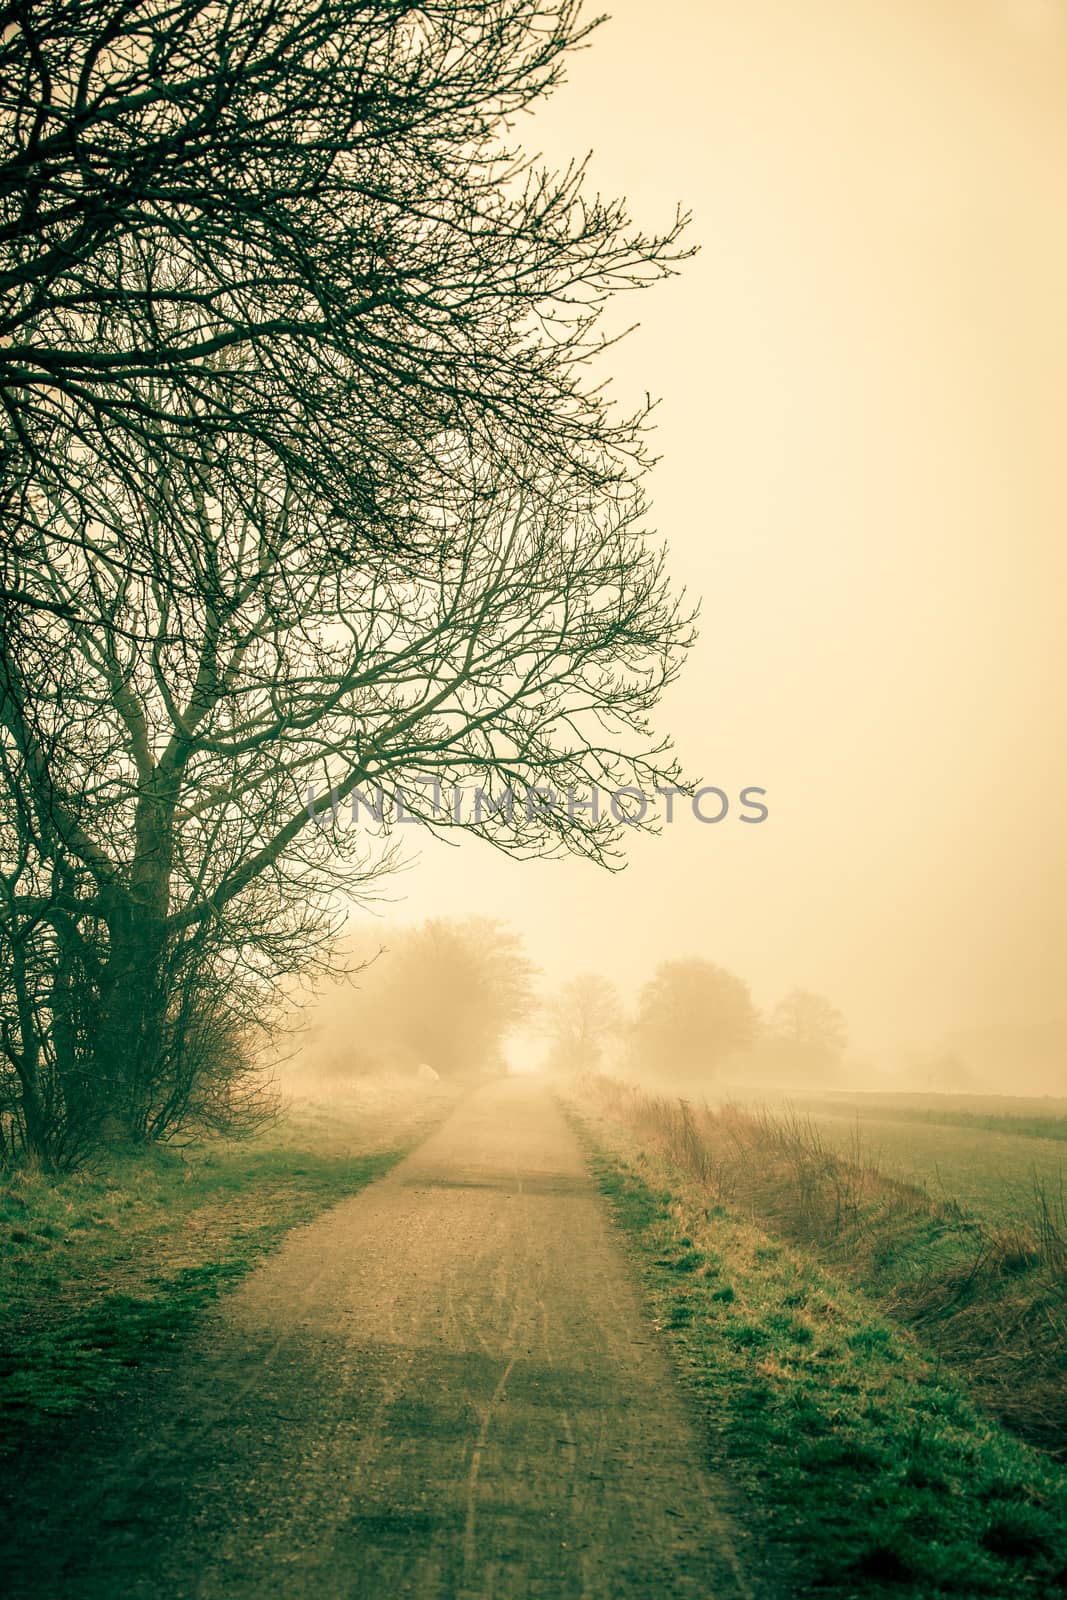 Misty road an early morning by Sportactive